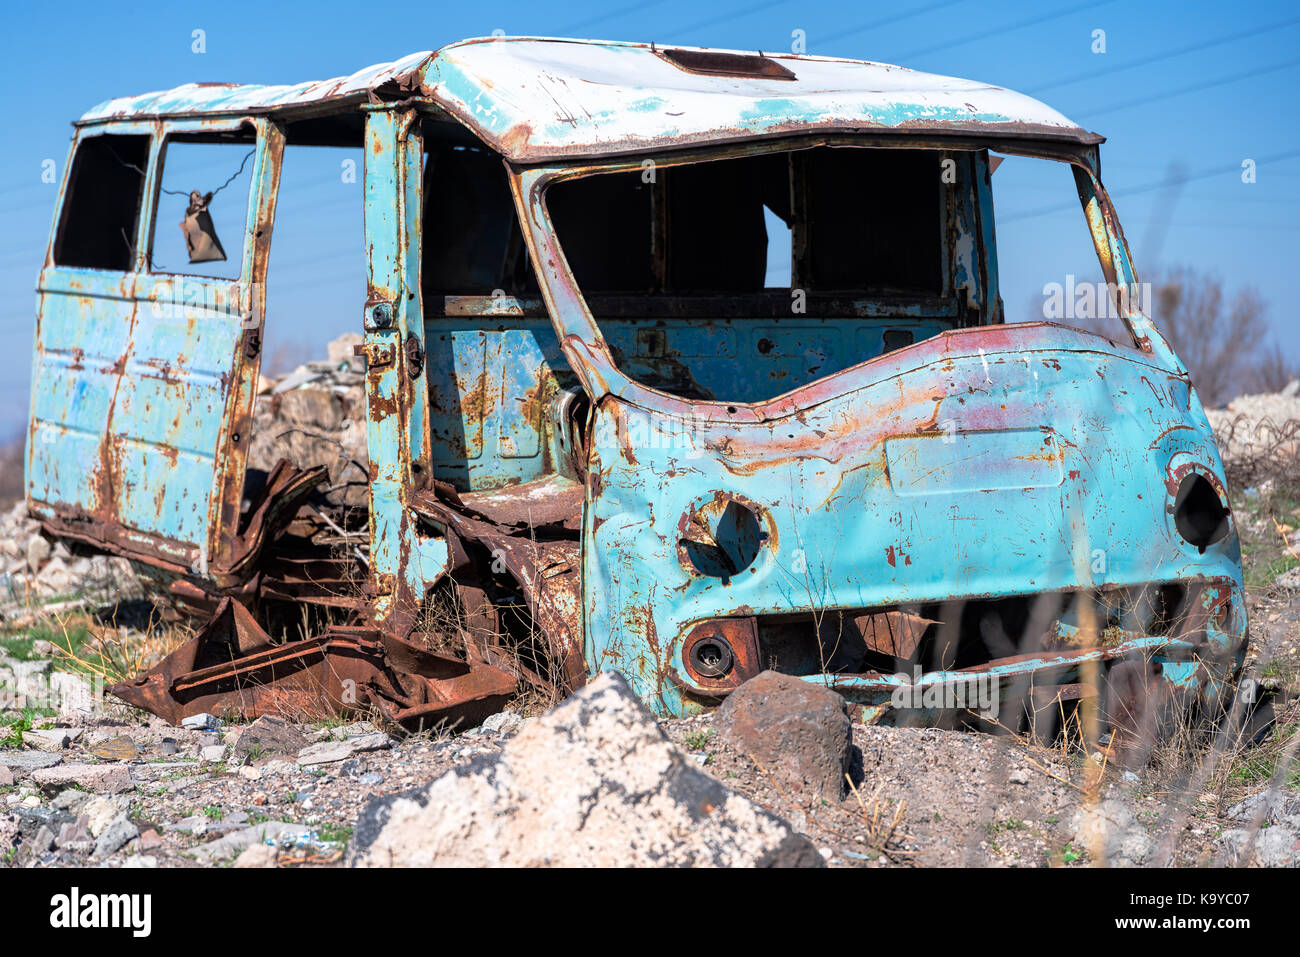 Rusty, old and abandoned Soviet Russian van out in the wasteland in rural Southern Armenia in Ararat province on 4 April 2017. Stock Photo